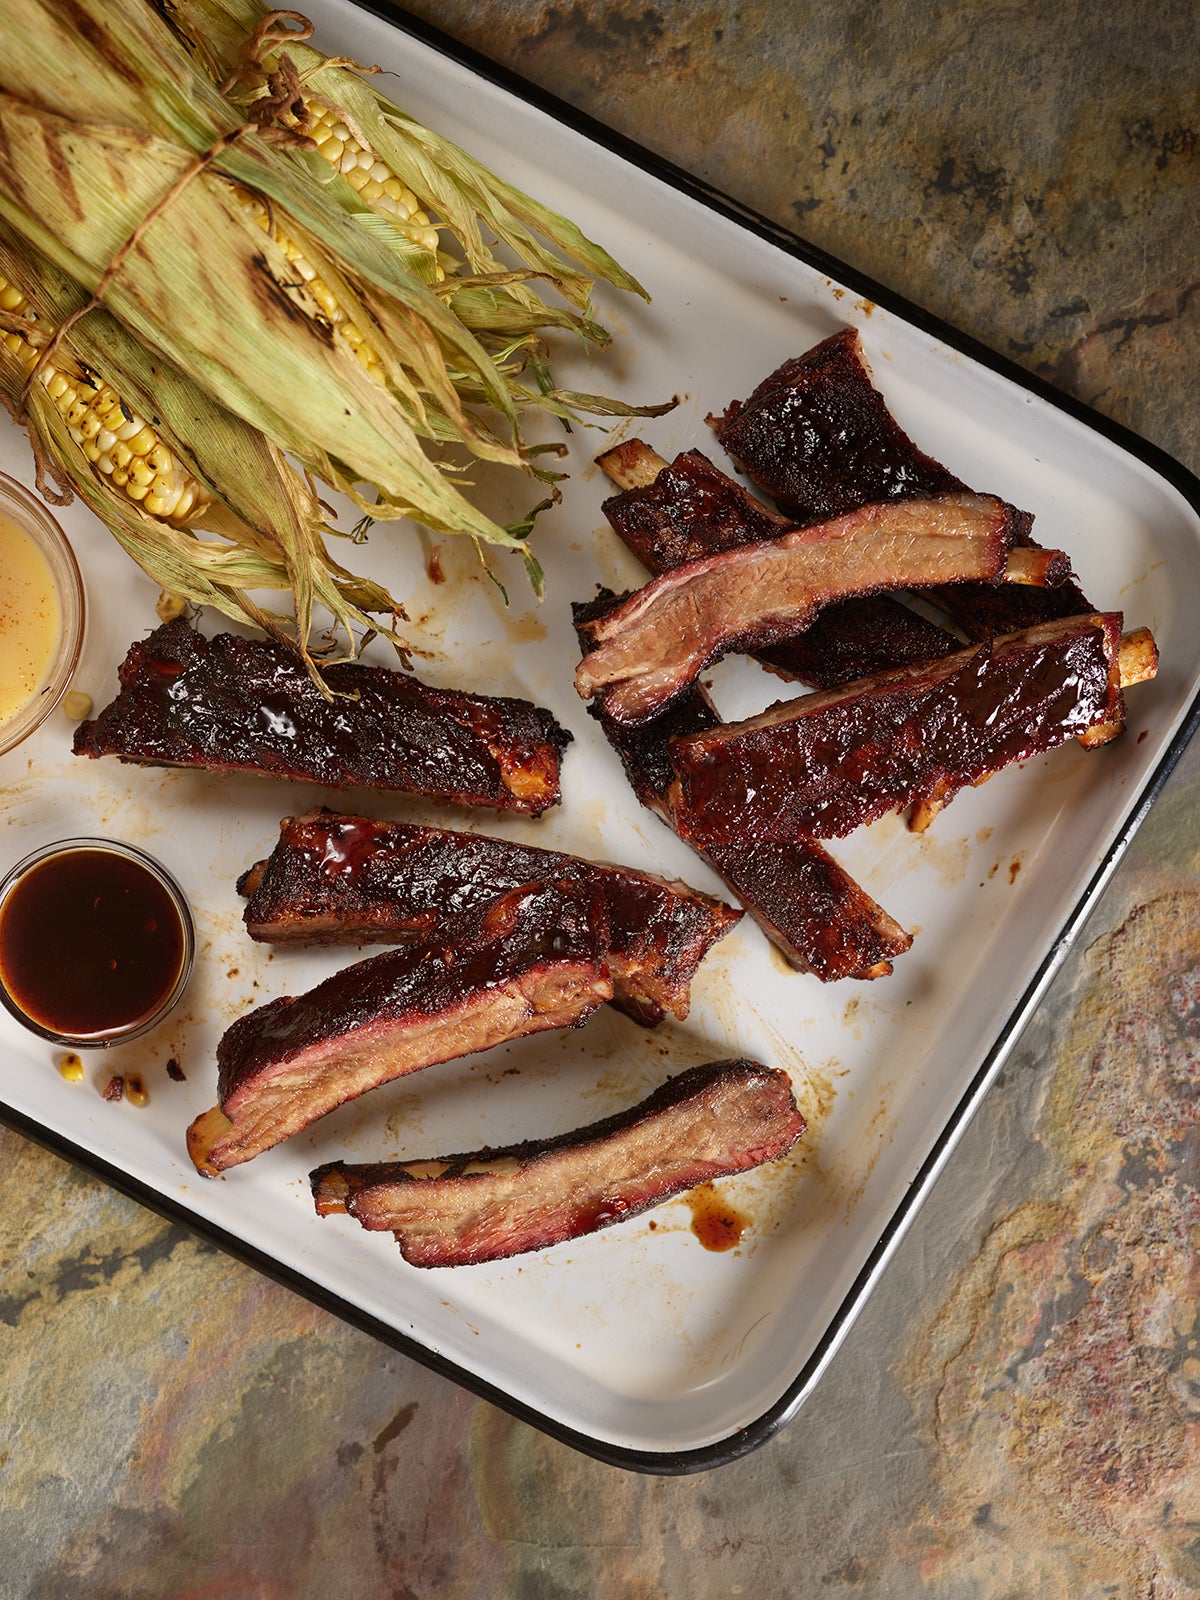 Grilled Ribs with BBQ Rub and Grilled Corn in Husk